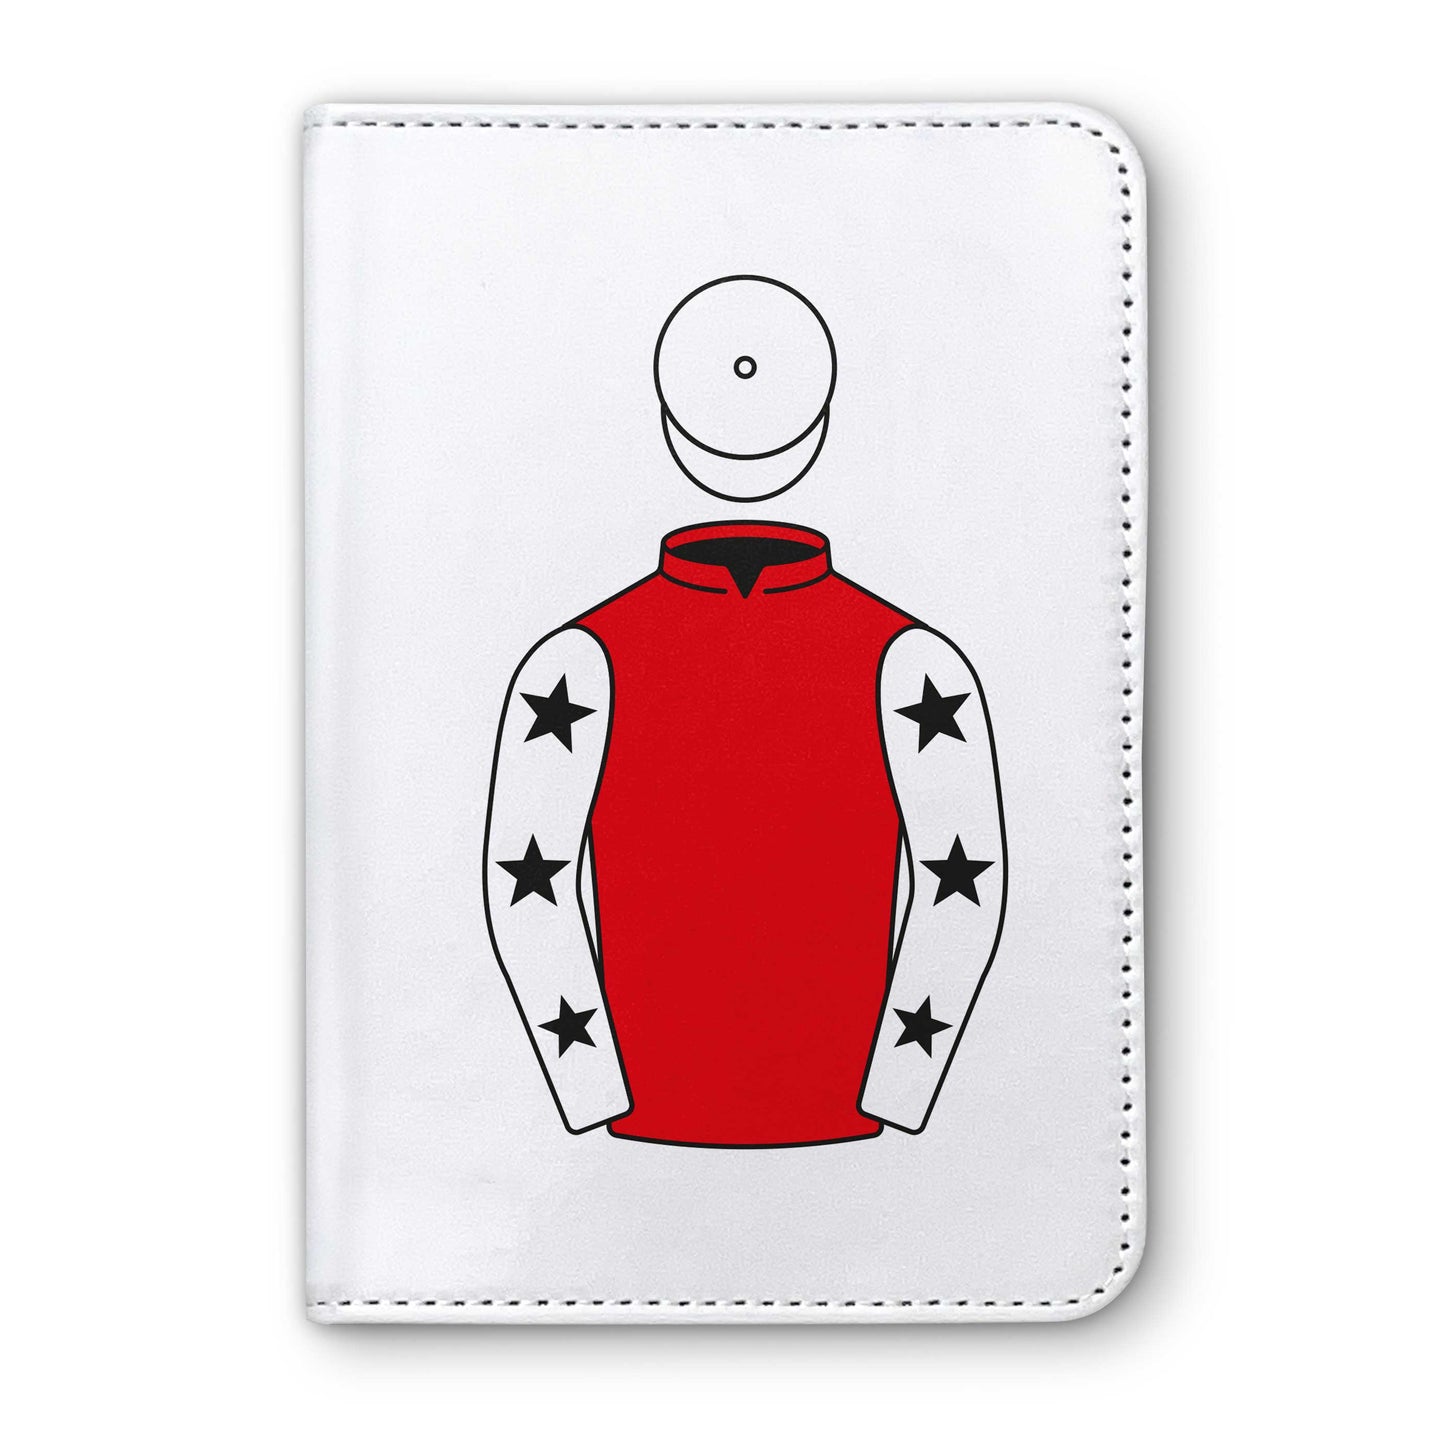 Mezzone Family Horse Racing Passport Holder - Hacked Up Horse Racing Gifts